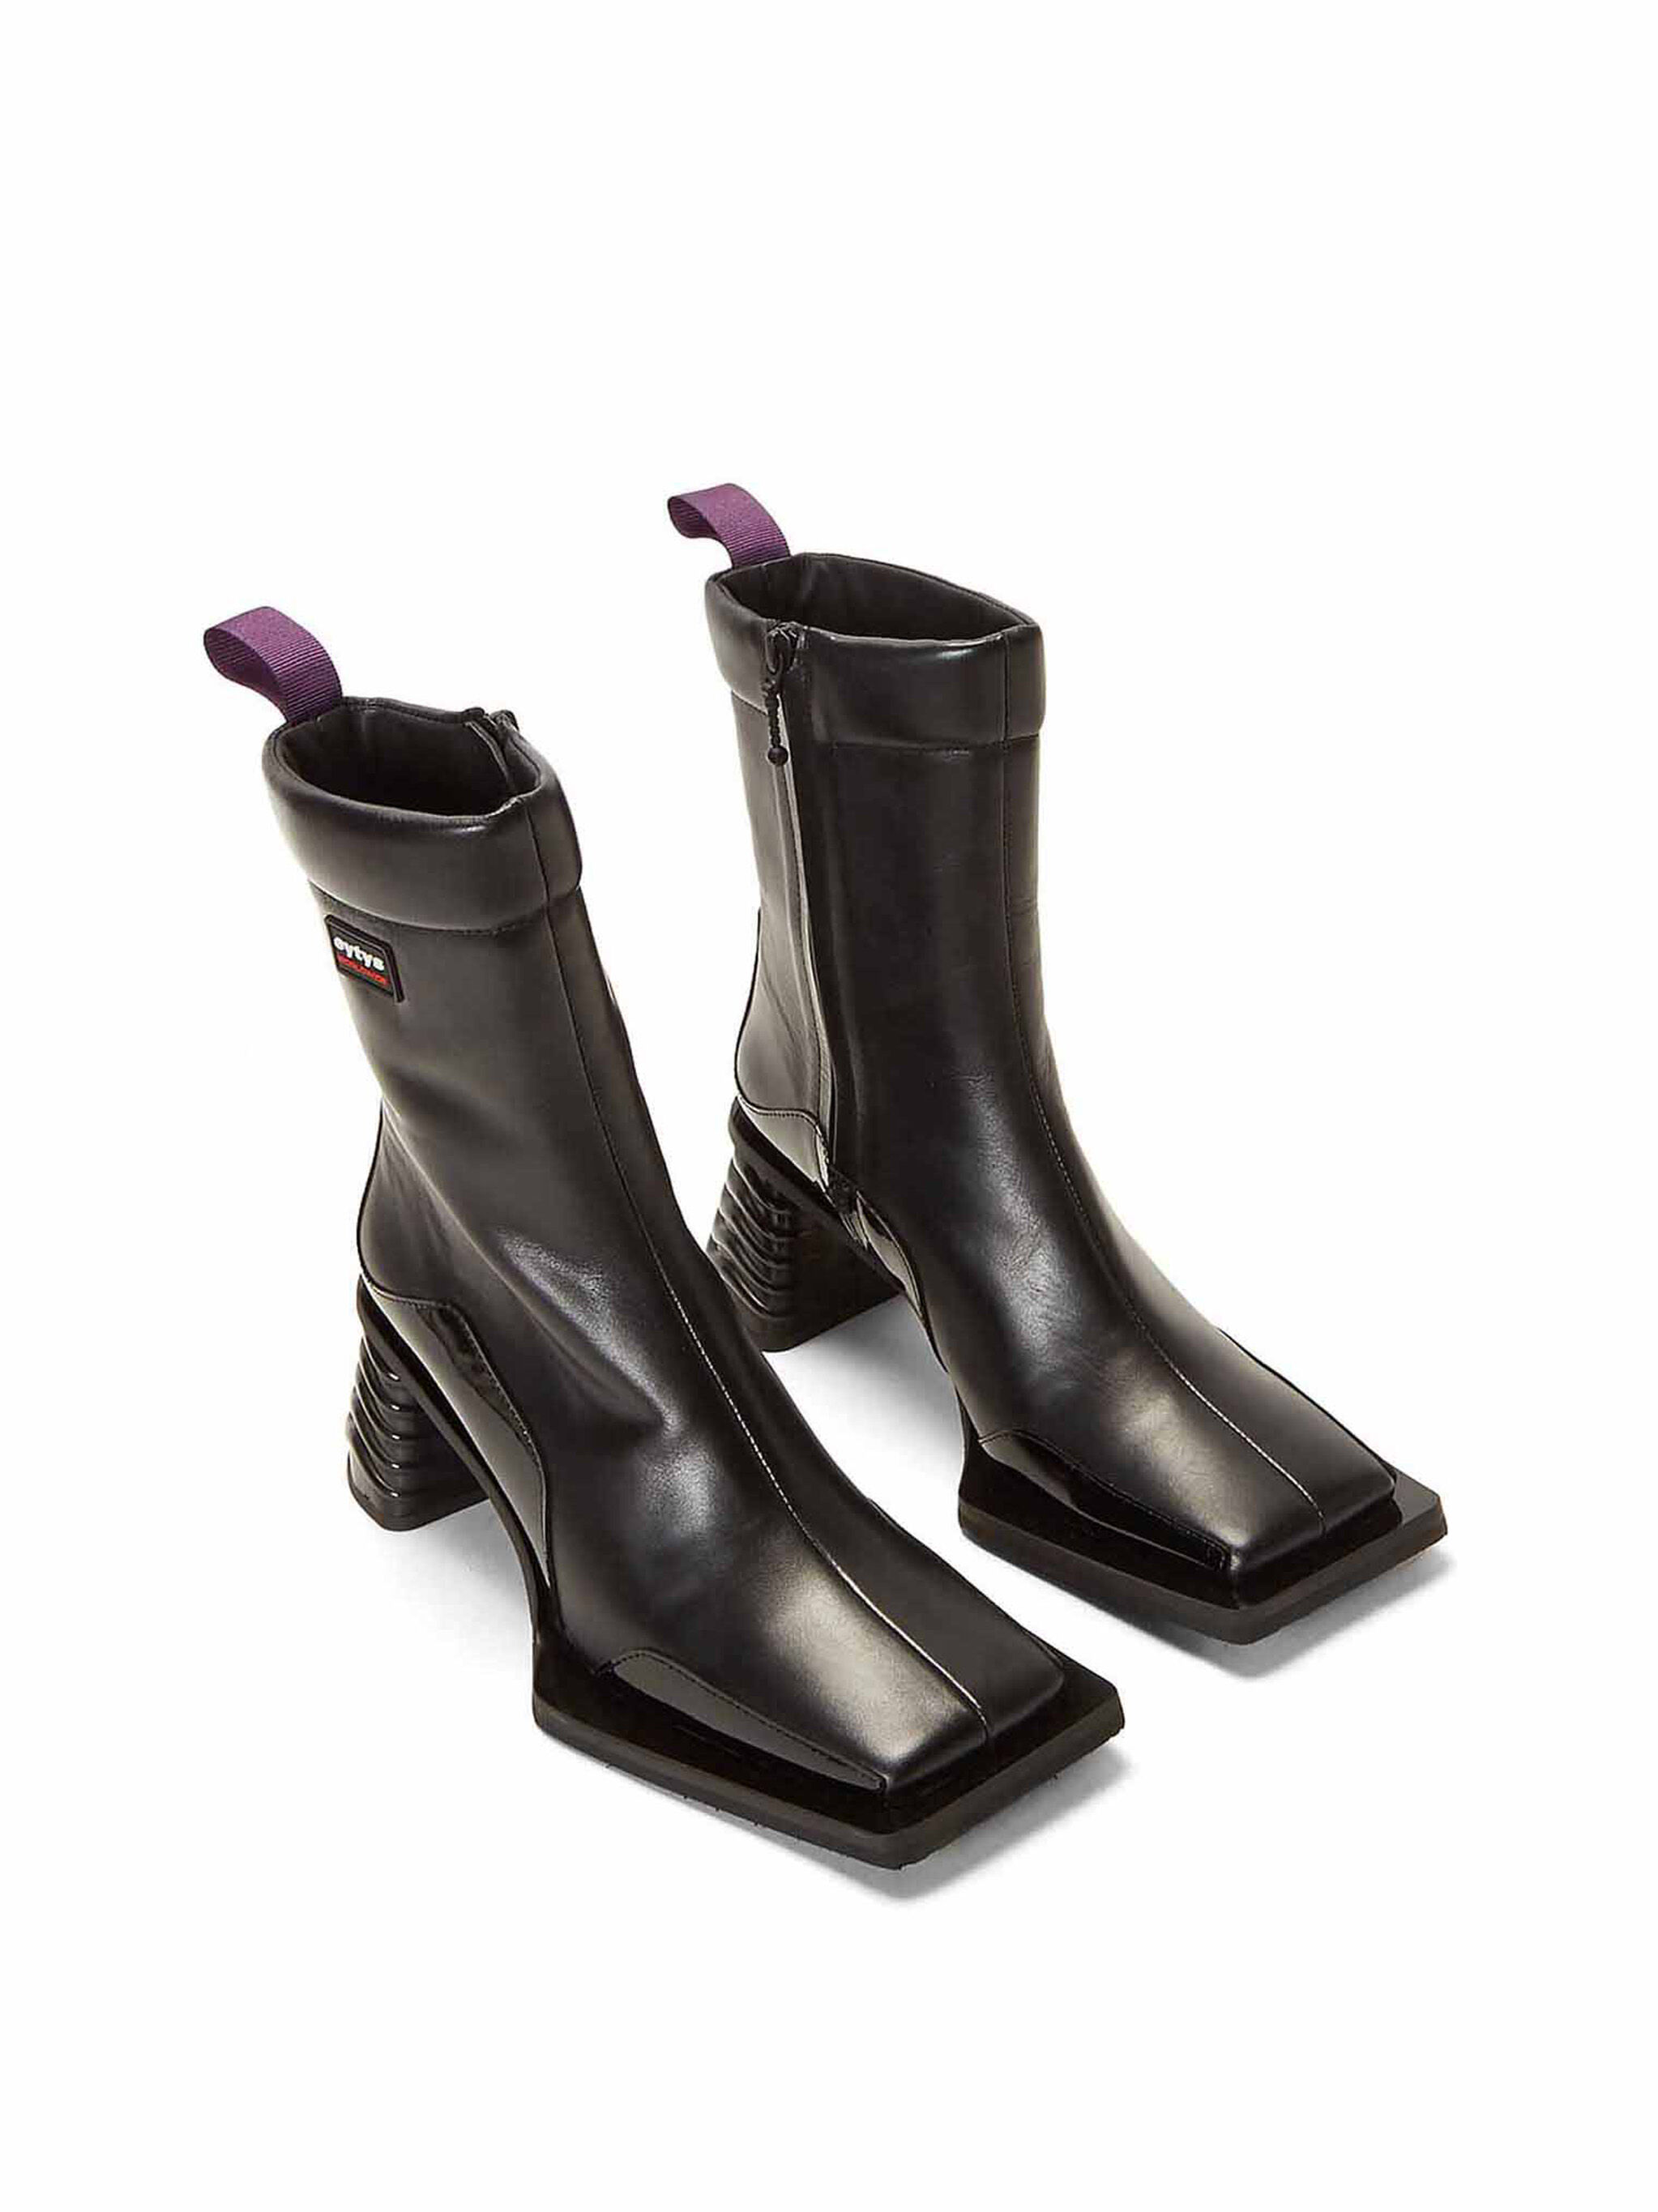 Eytys Gaia Black Leather Boots for Women | THE FLAMEL®